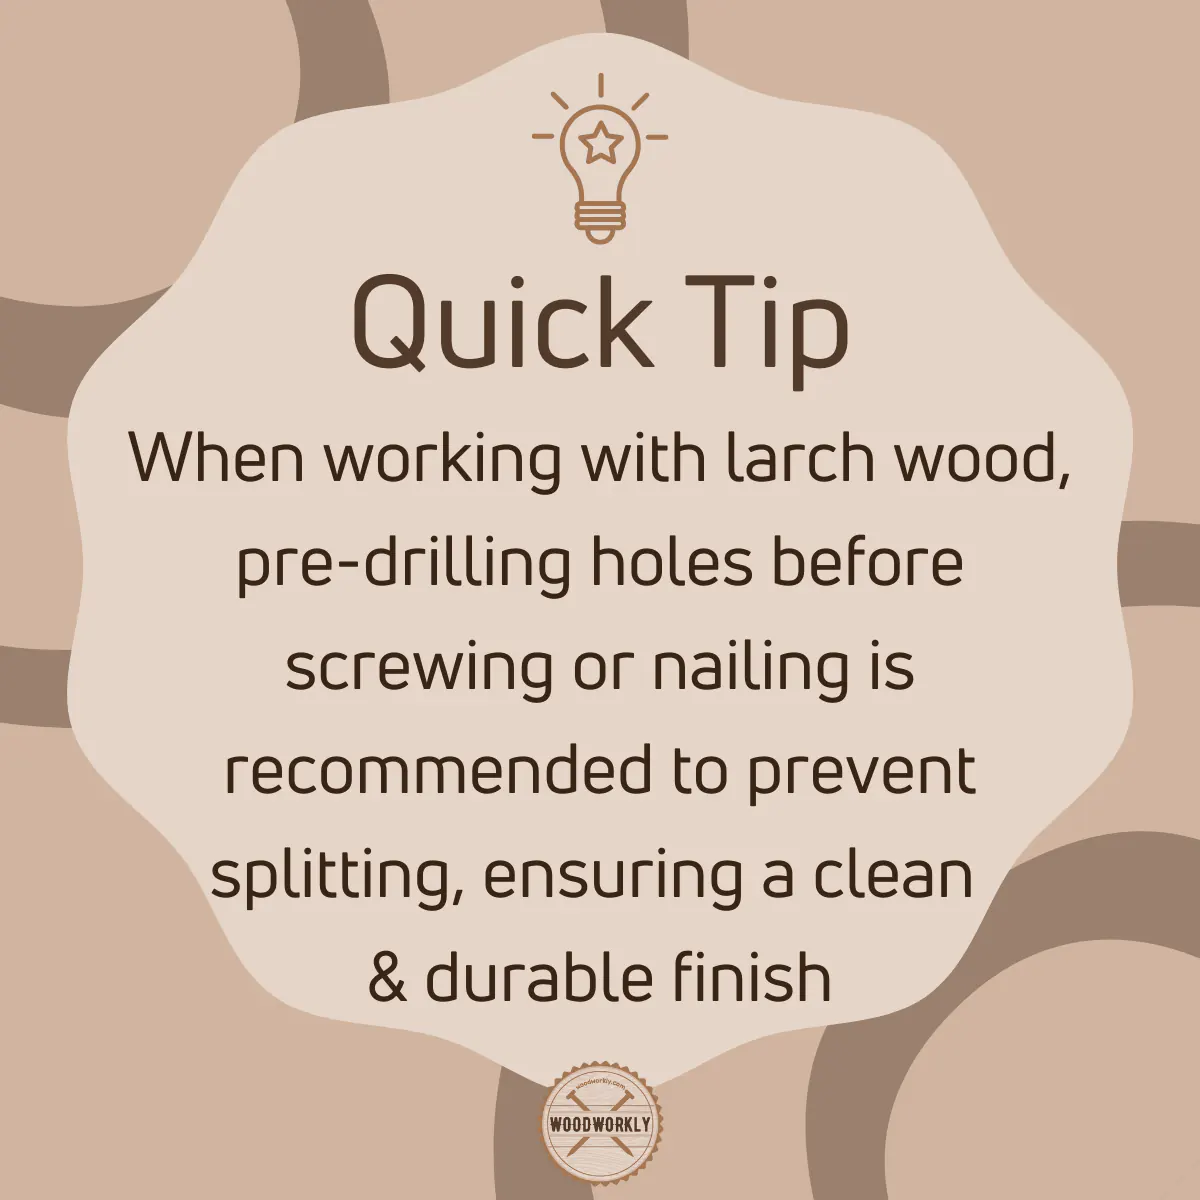 Tip for working with Larch wood